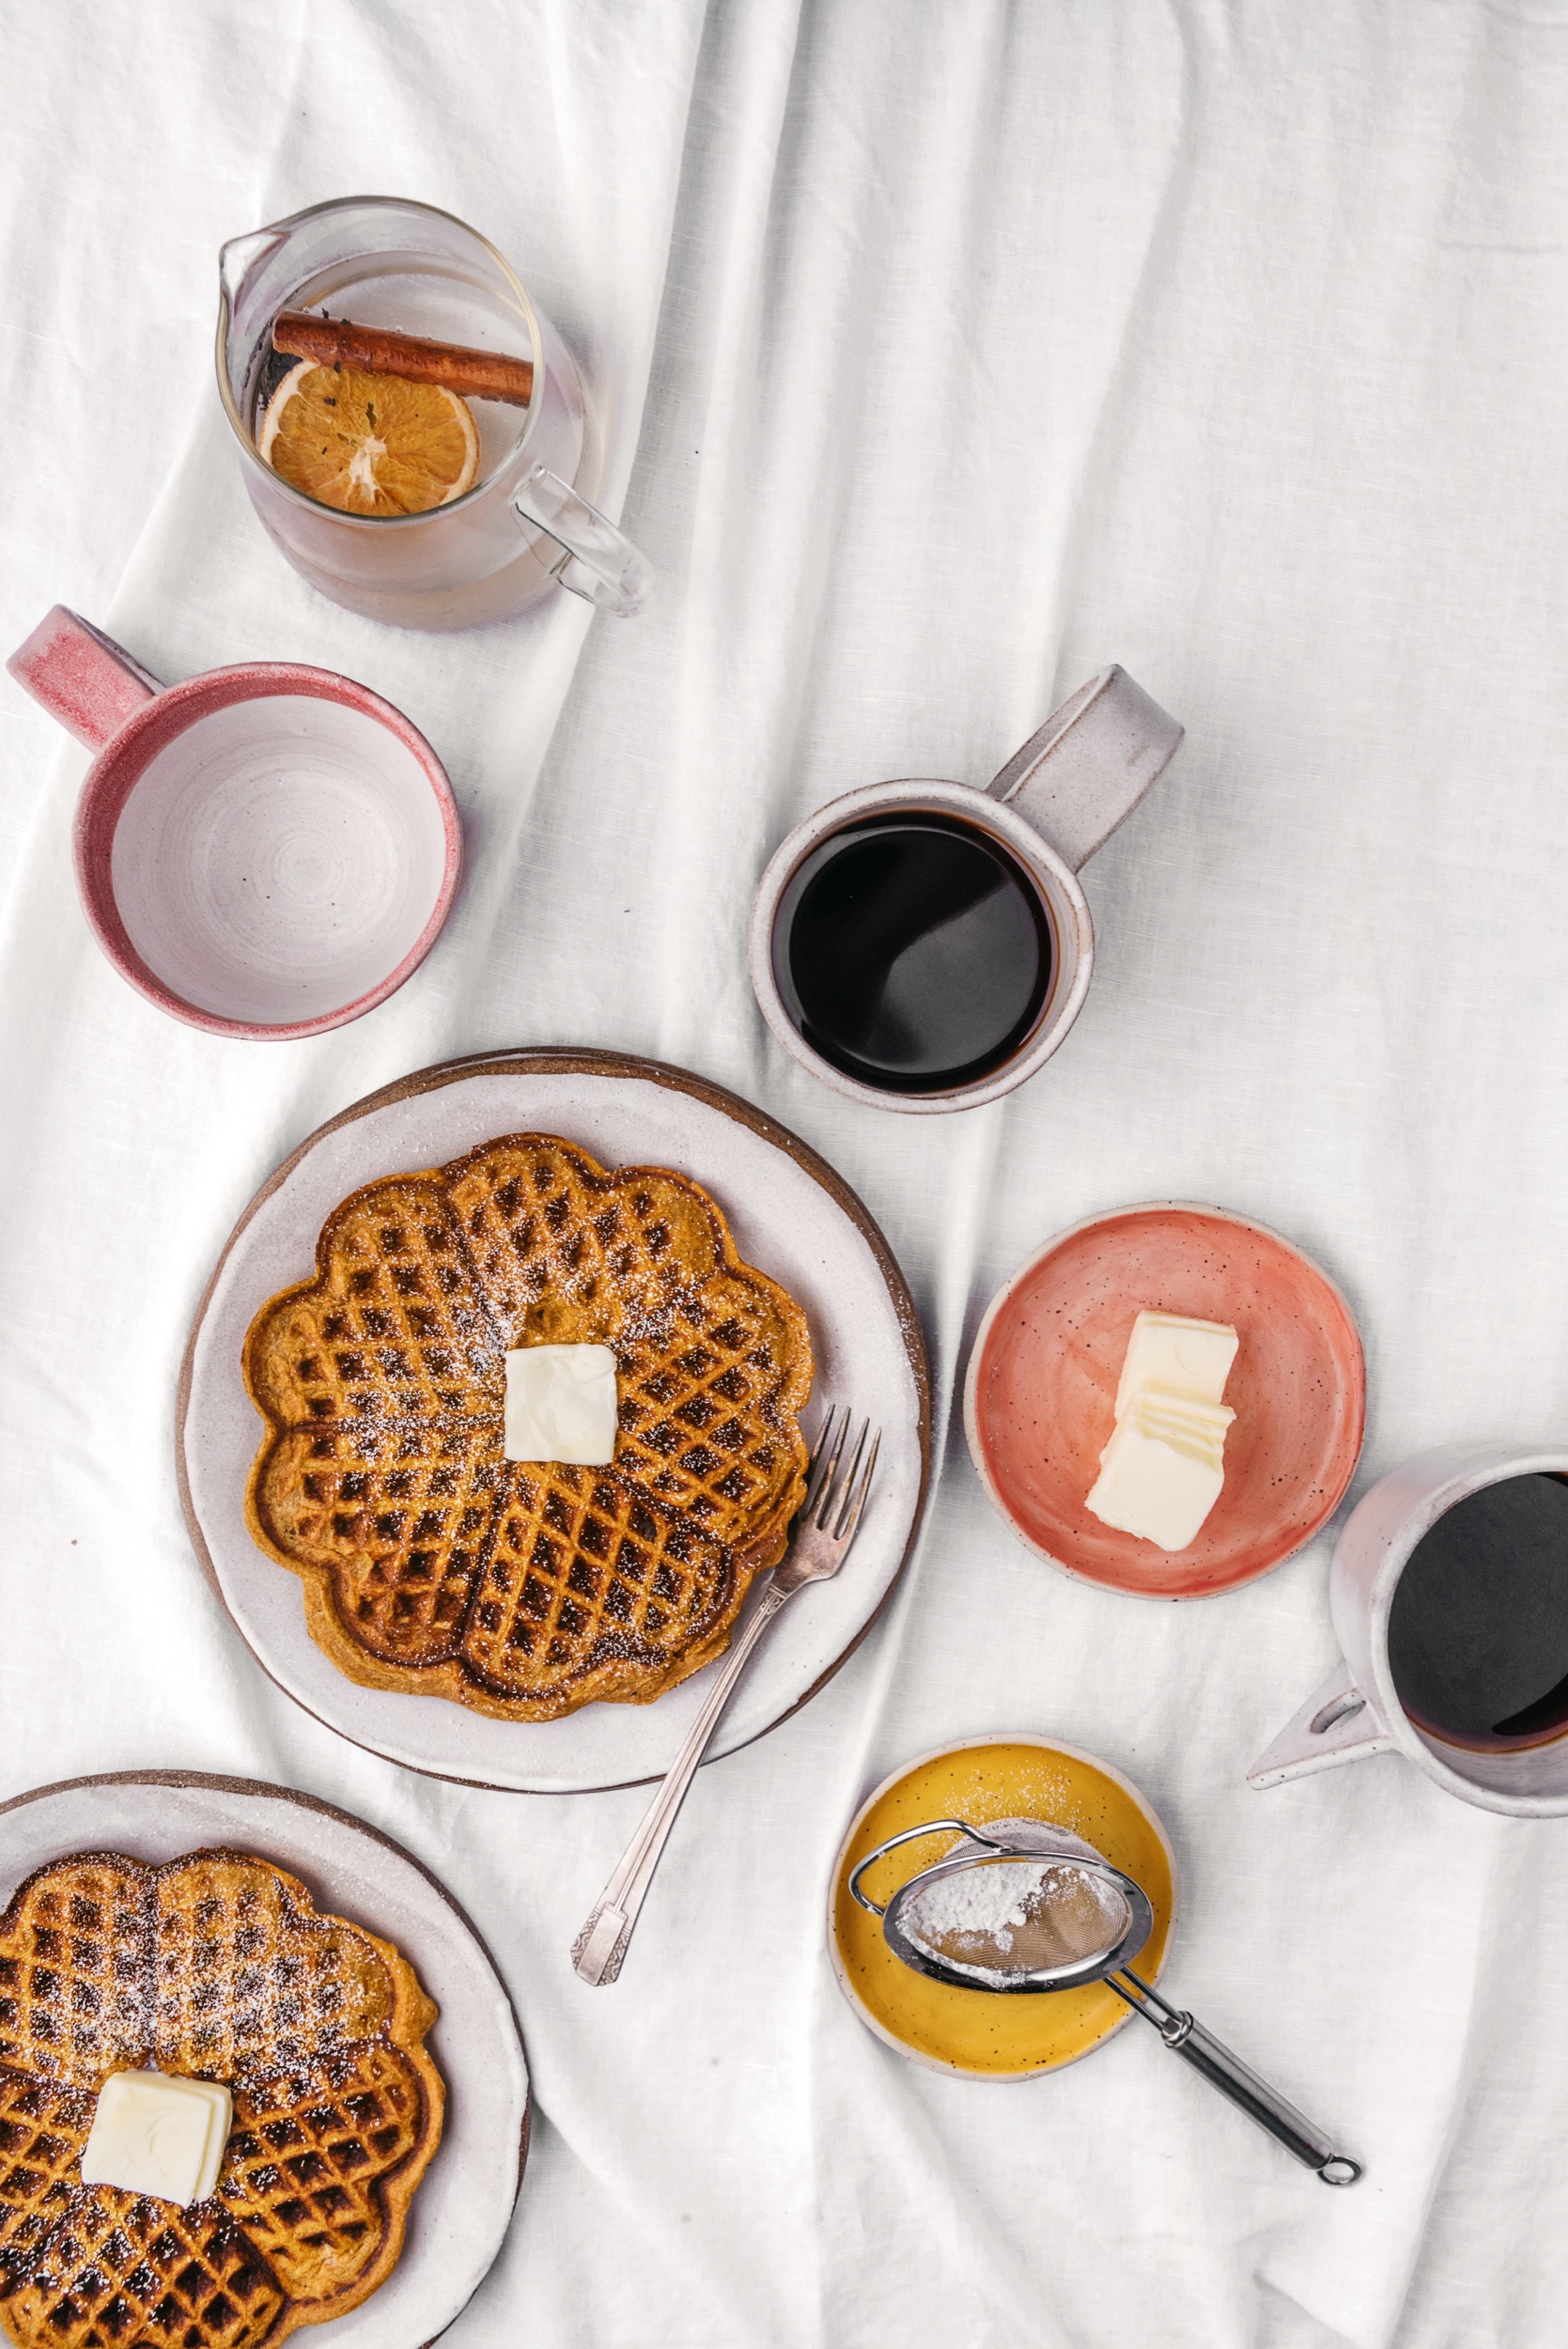 A Waffle Iron That Makes Delicious, Edible Waffle Bowls - Genius